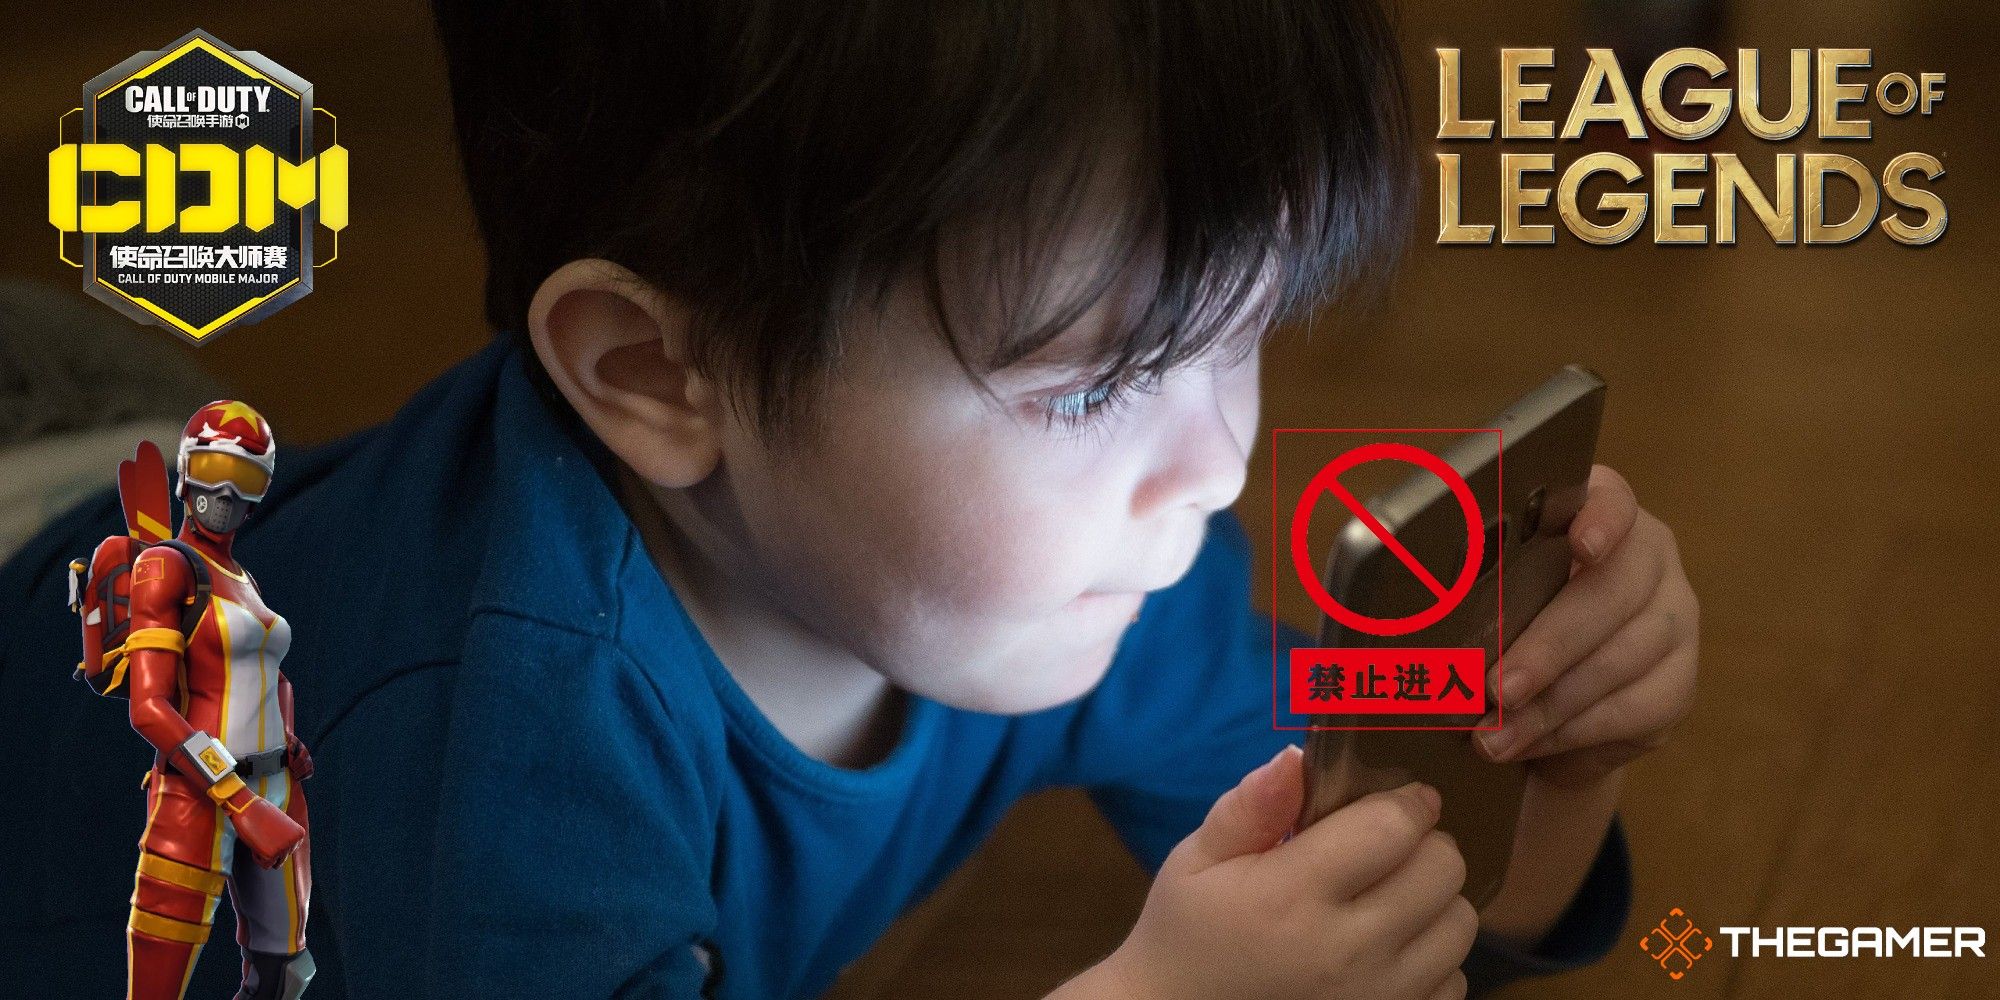 Boy with smartphone China video game ban